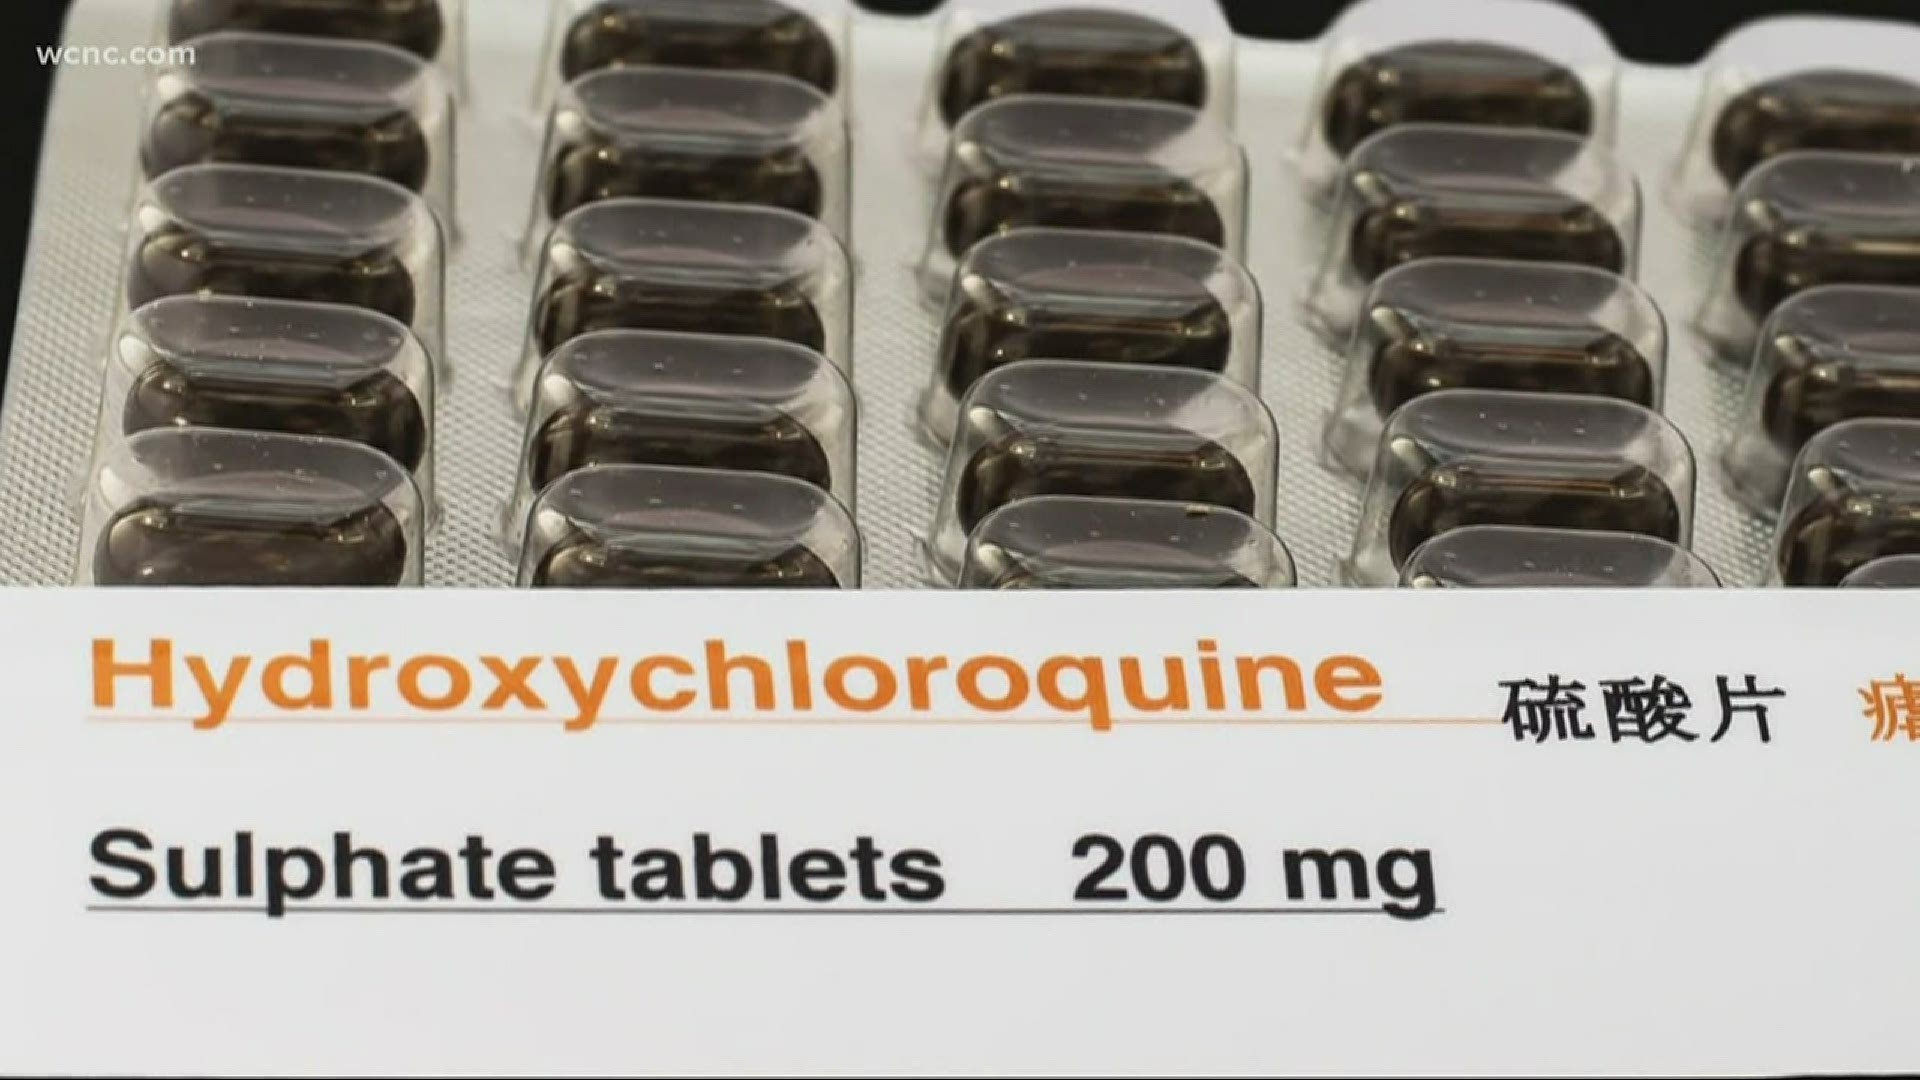 For weeks now the president has talked about the possibility that the drug hydroxychloroquine could help COVID-19 patients.